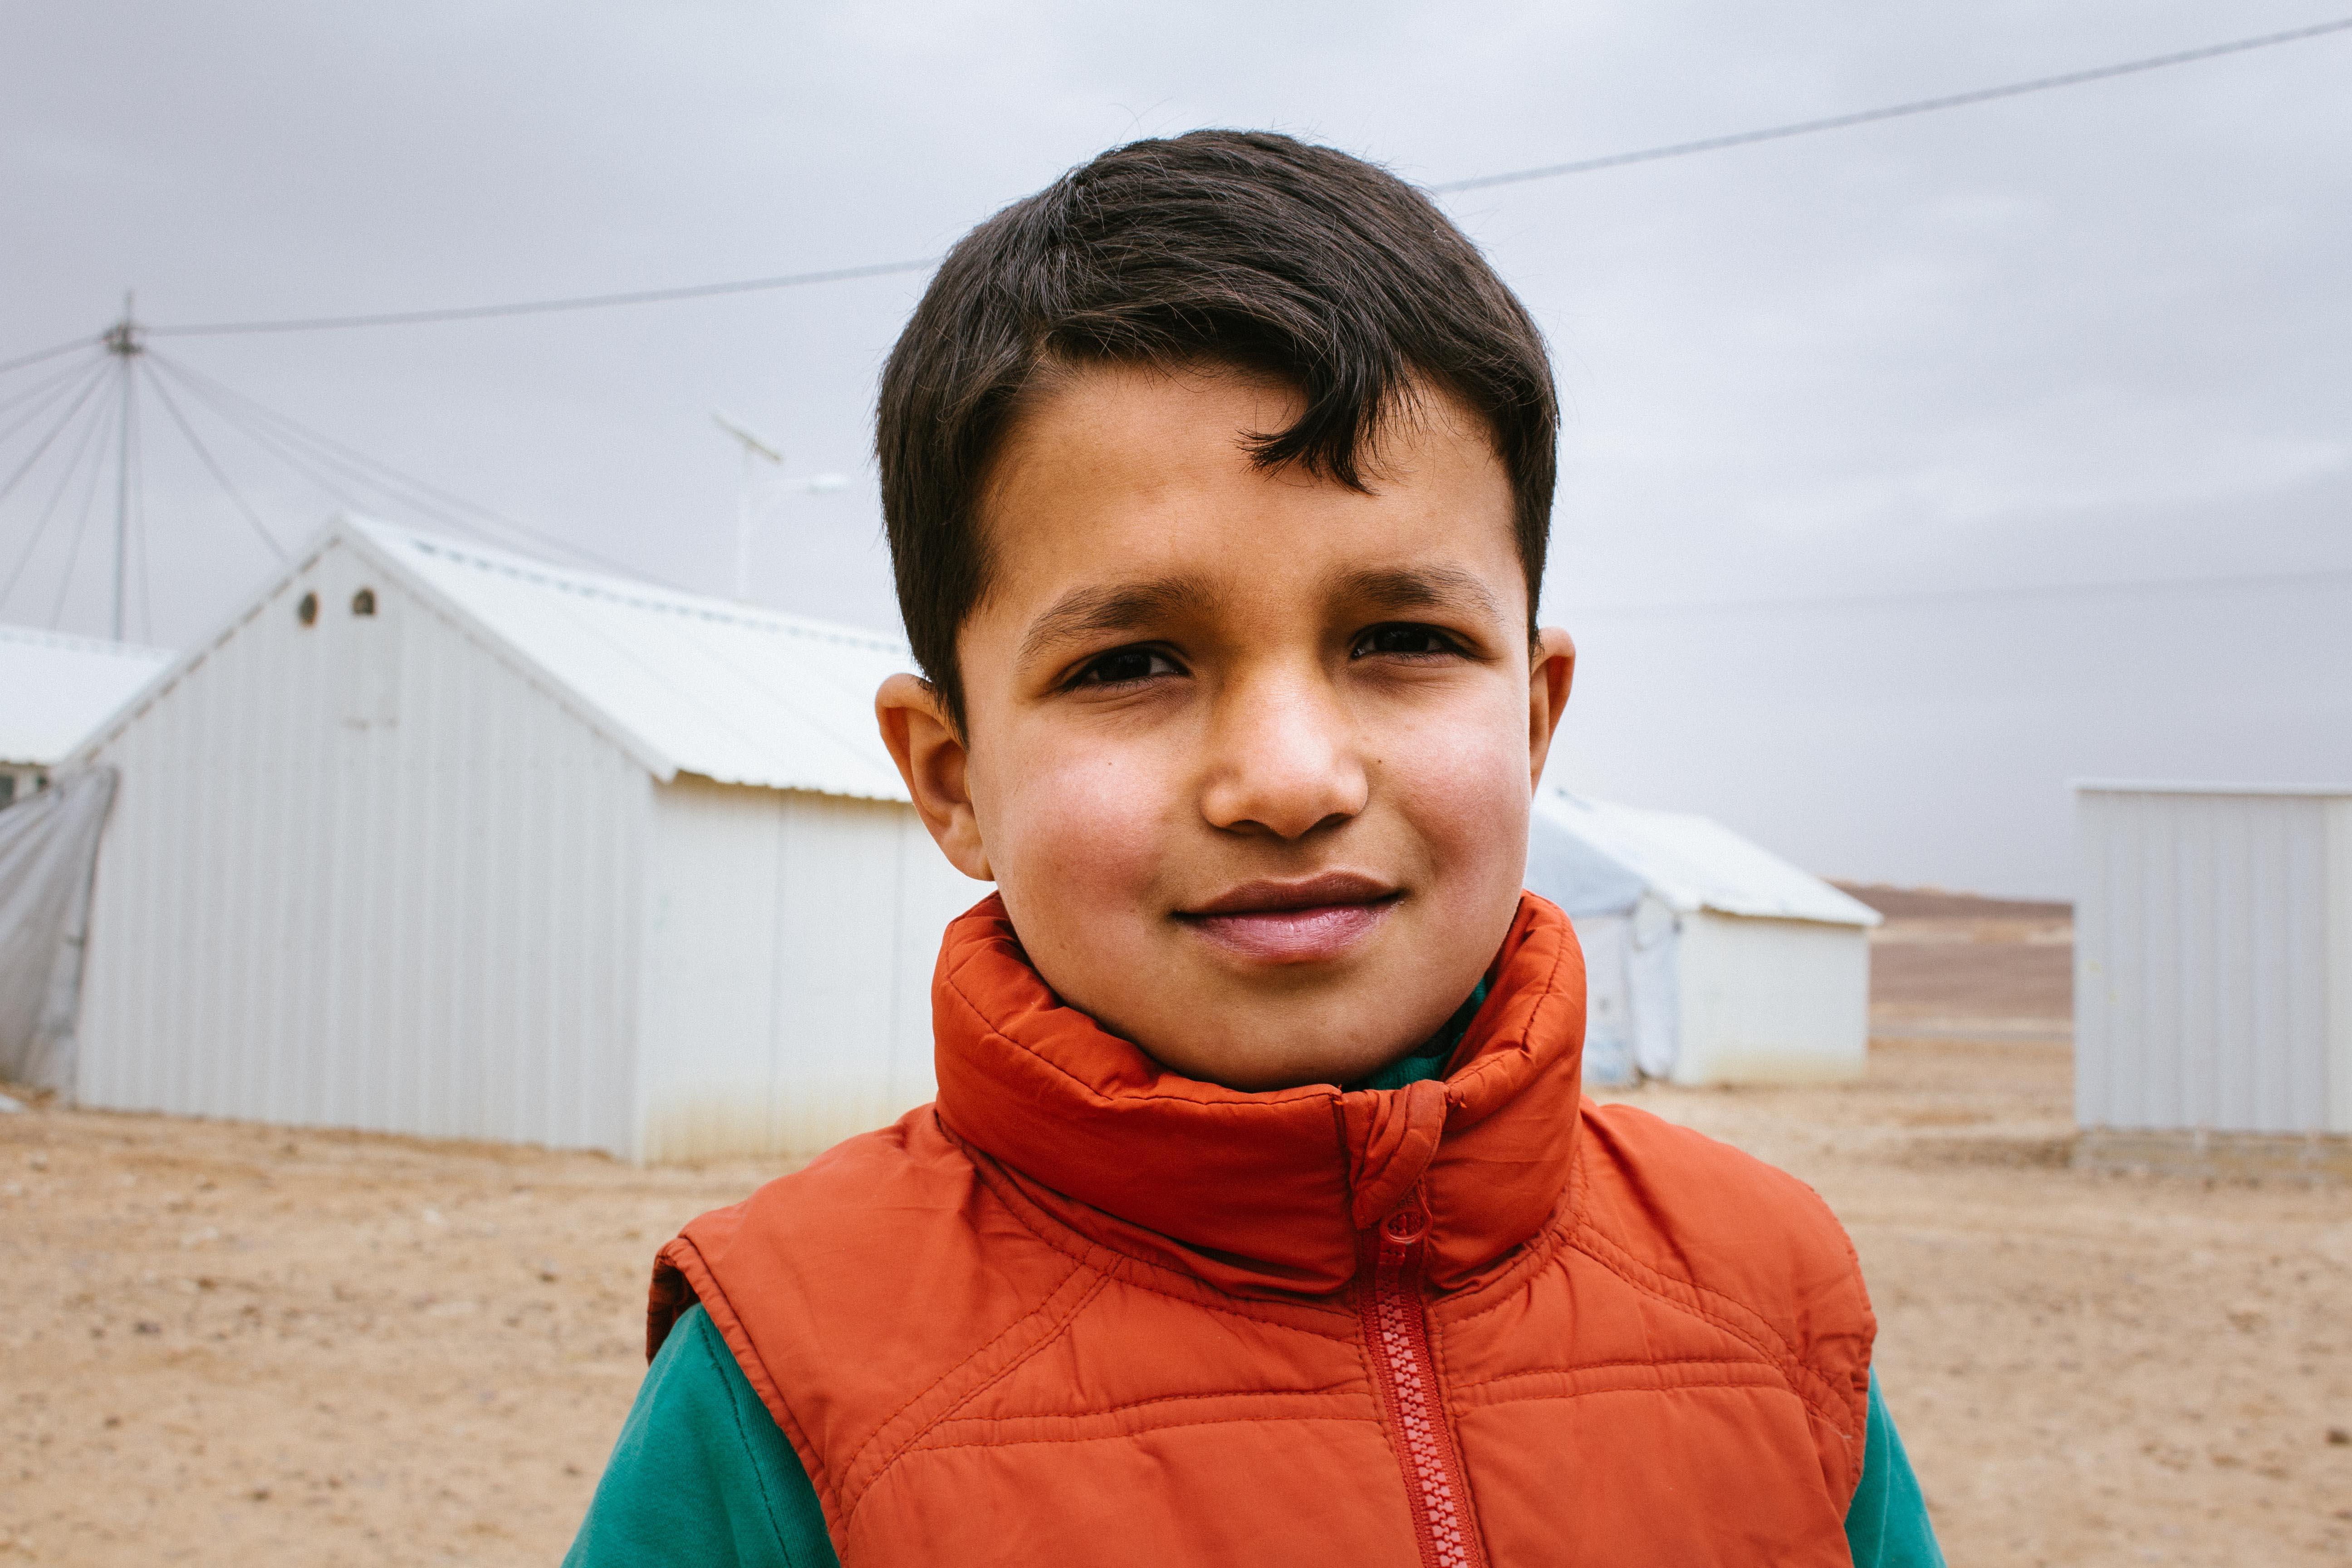 What is life like for a Syrian refugee child?